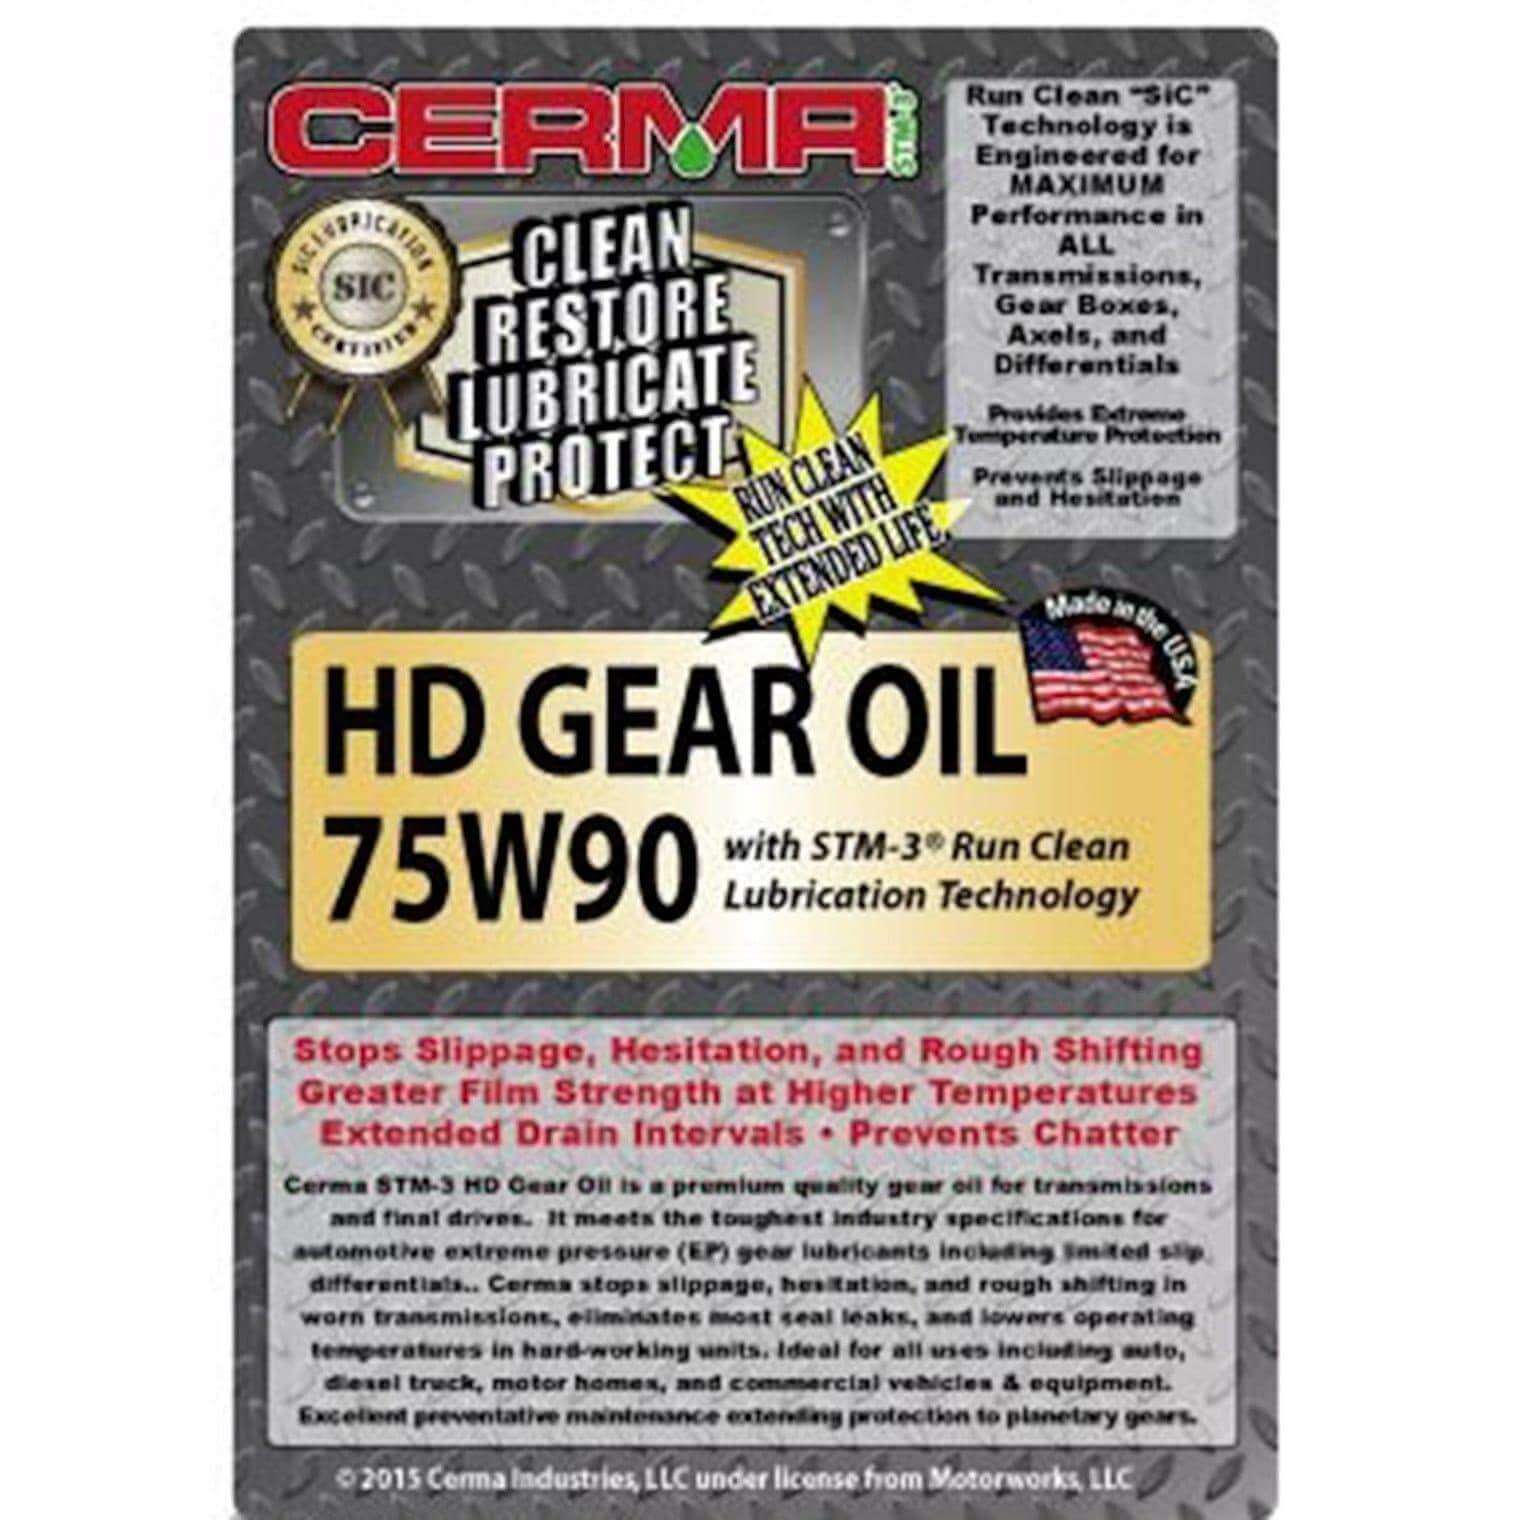 Cerma Ceramic Heavy Duty Gear Oil 75W-90W at $14.09 only from cermatreatment.com